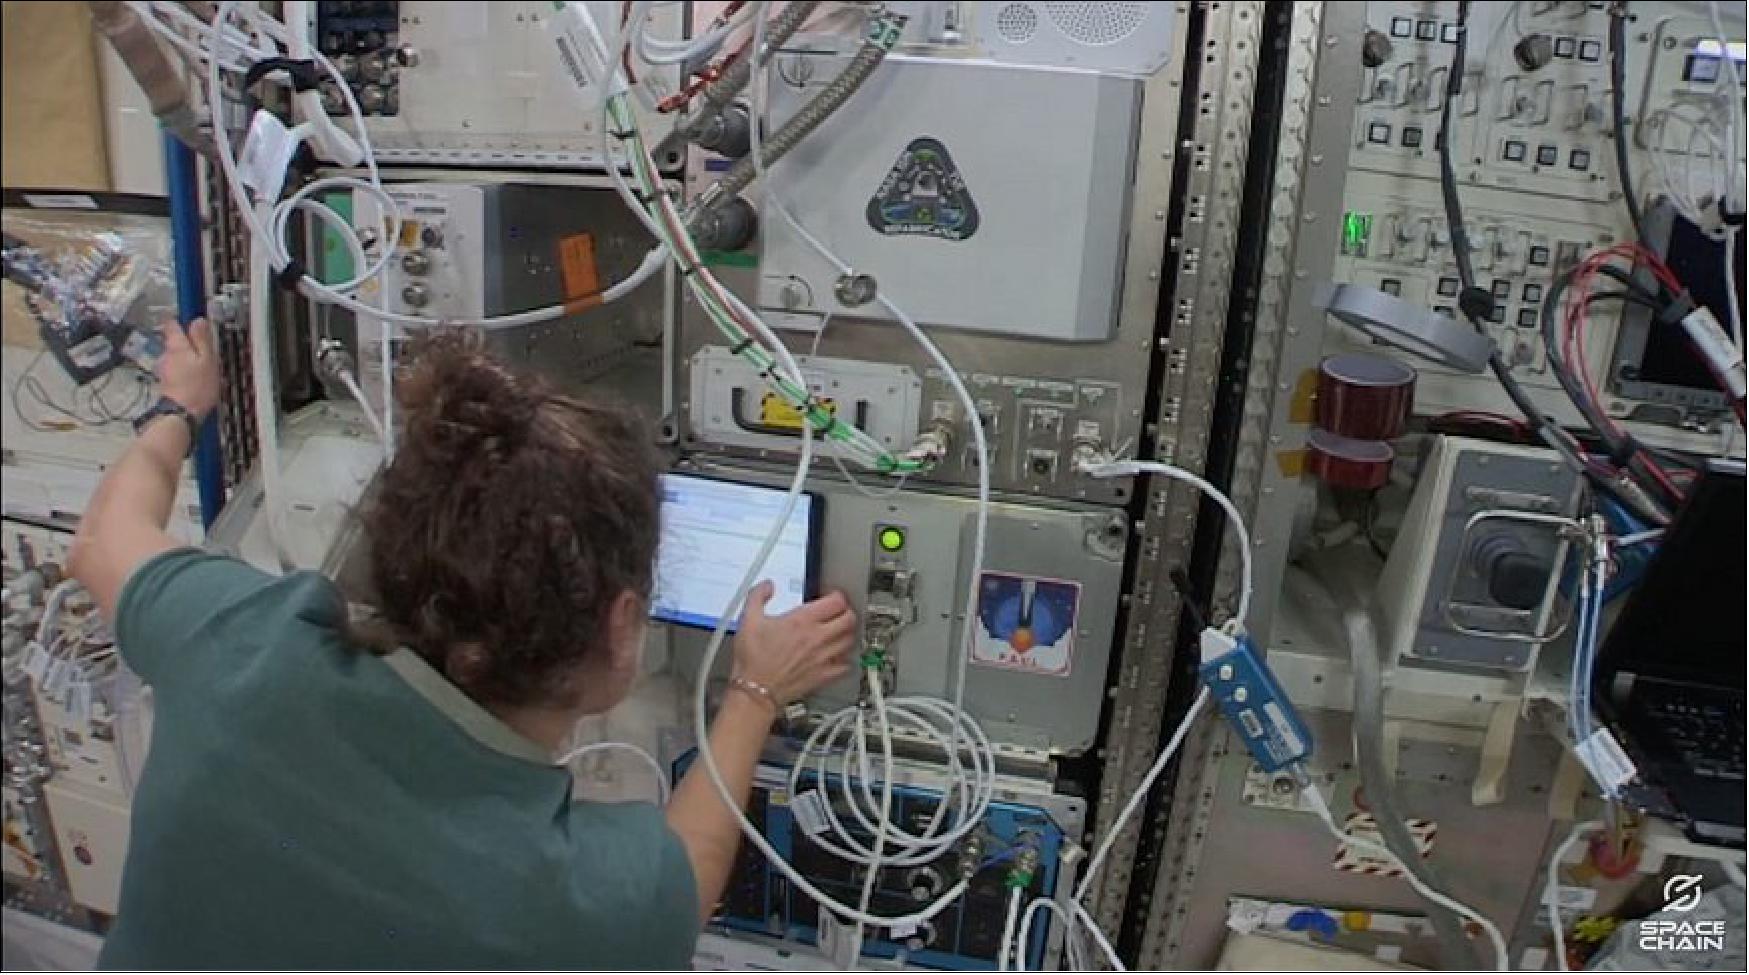 Figure 8: NASA astronaut Jessica Meir installed SpaceChain's multisignature blockchain payload housed in a 1U Nanoracks Nanolab on the International Space Station in 2020 (image credit: YouTube screenshot)